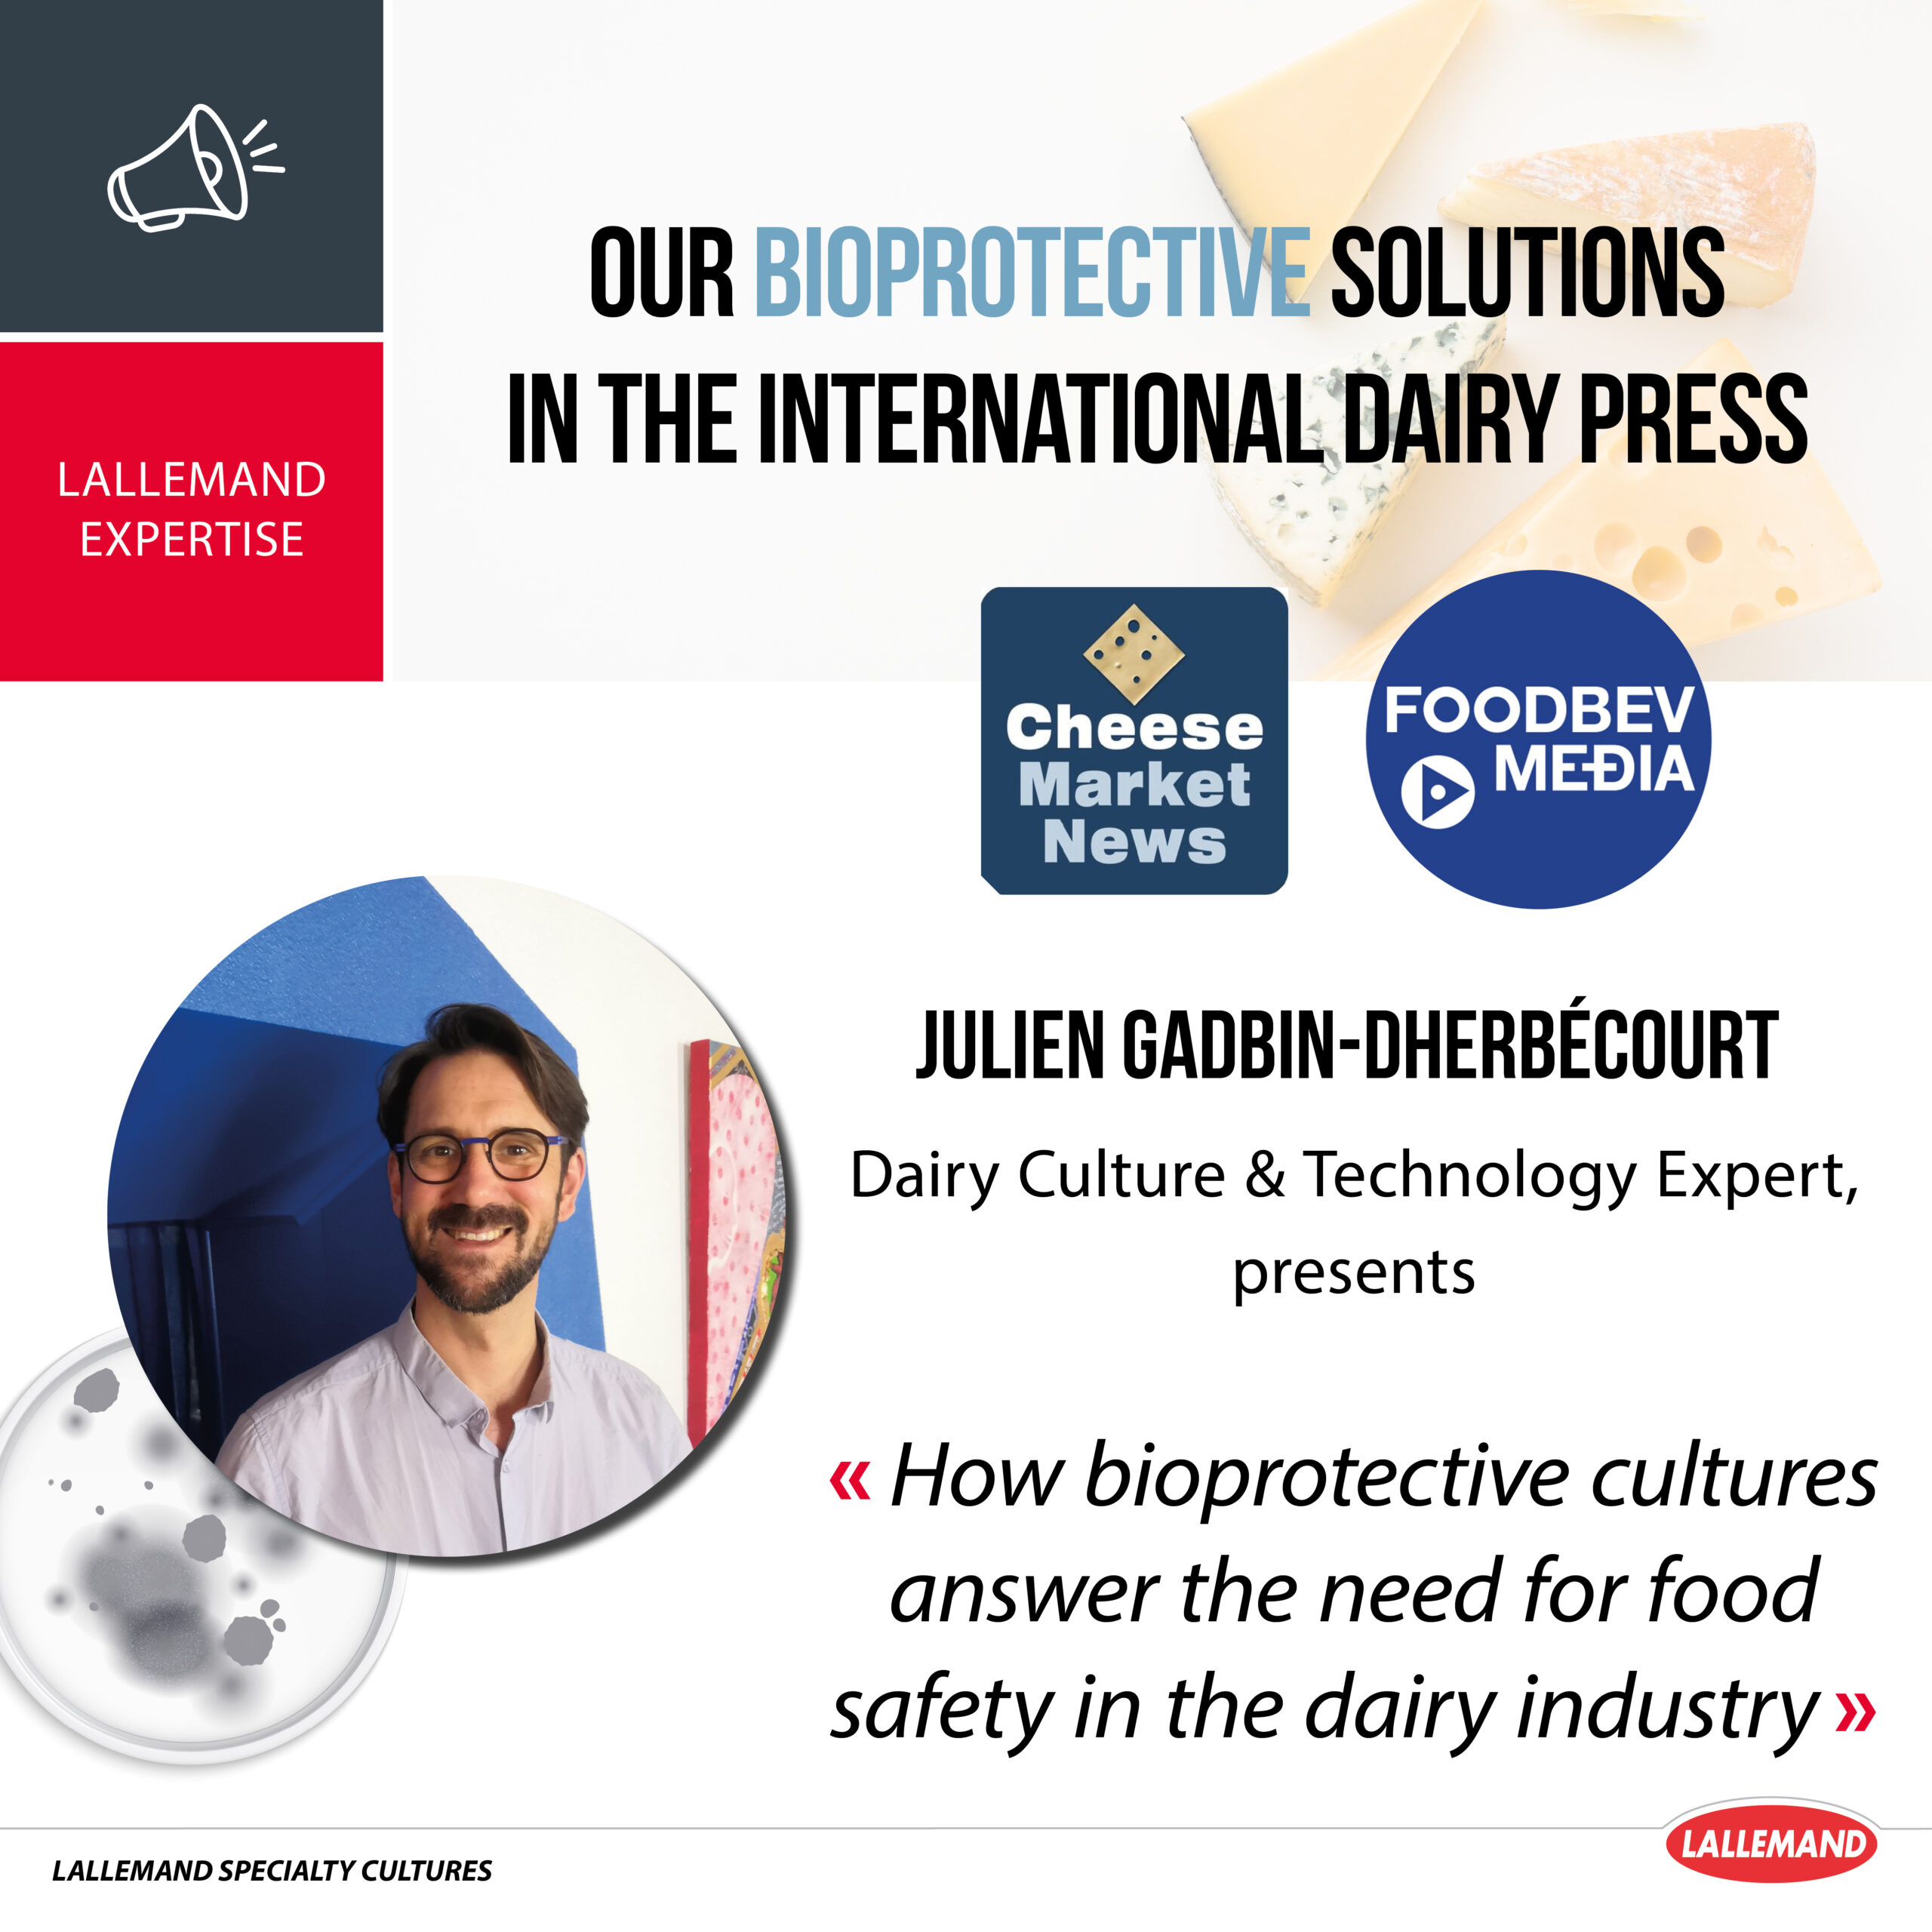 Read about our bioprotective solutions in the international dairy press!